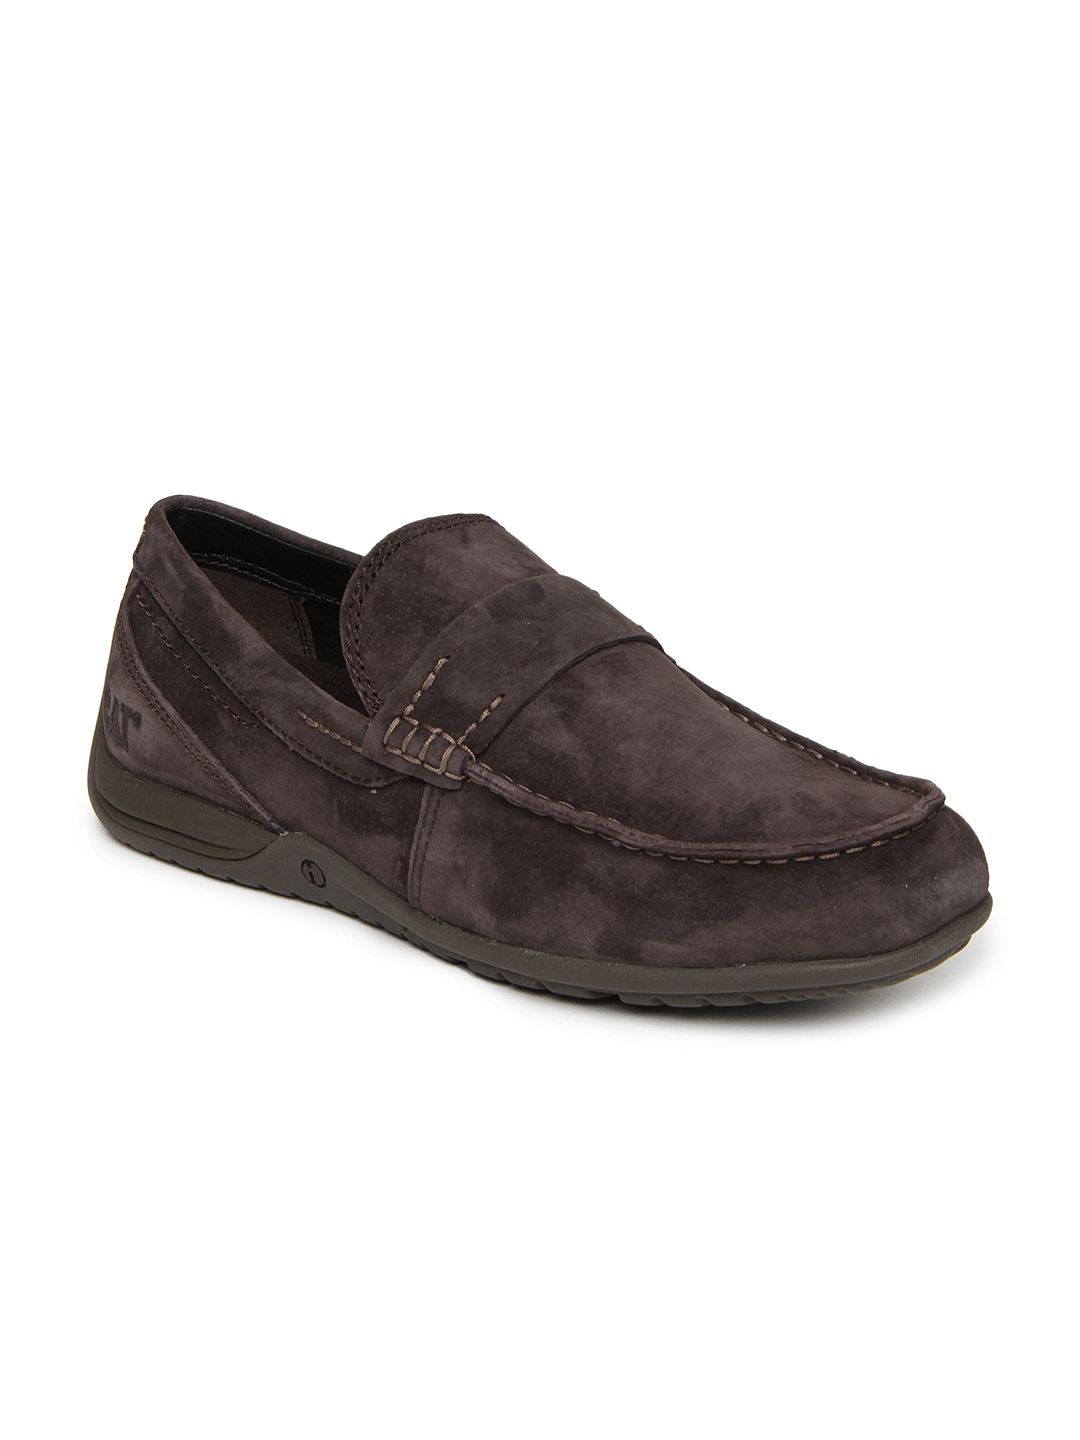 cat men coffee brown casual shoes